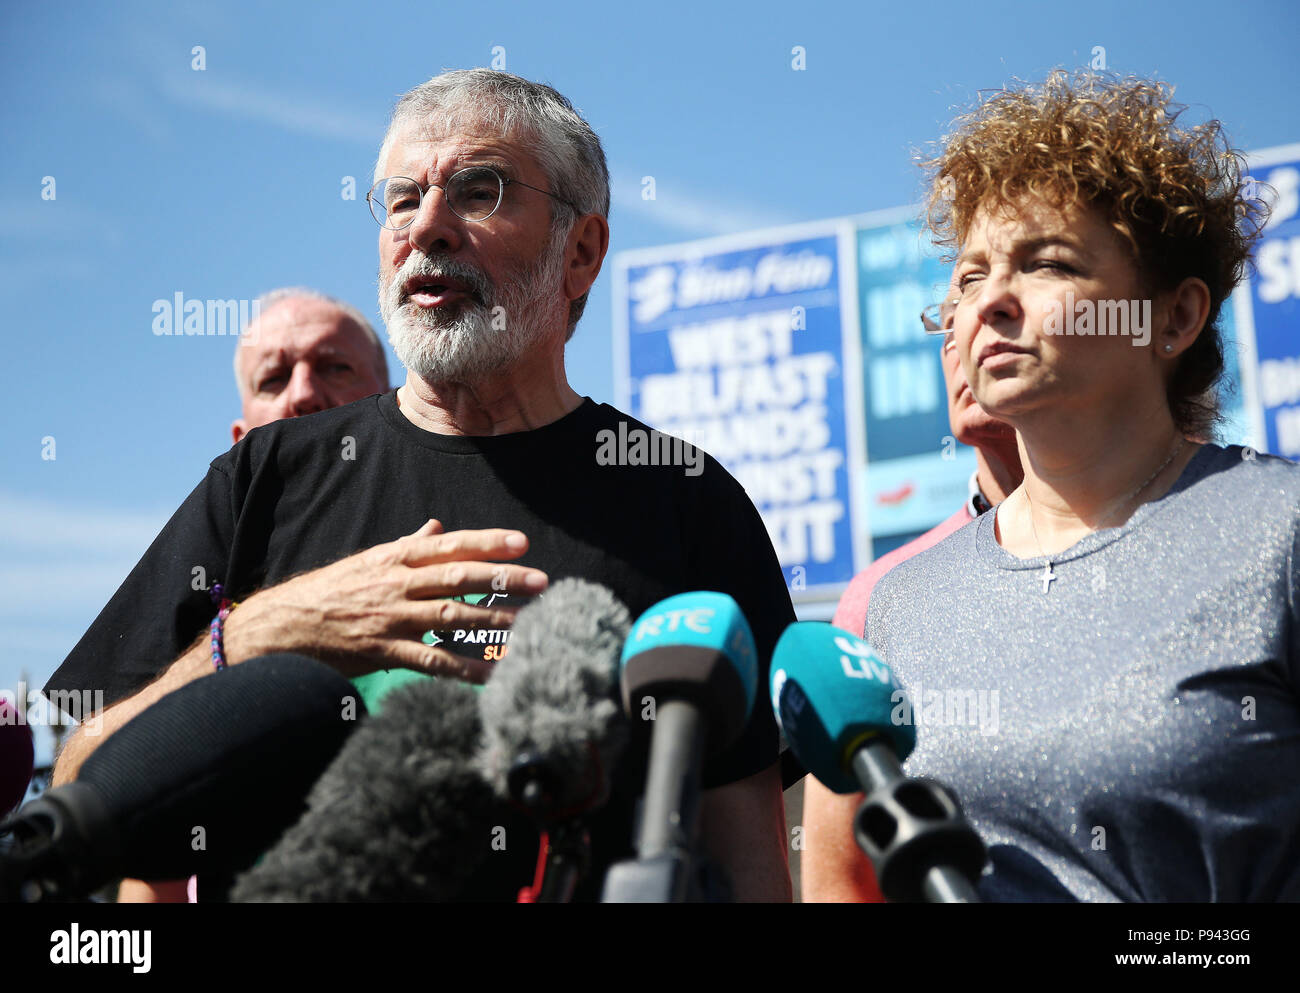 Former Sinn Fein president Gerry Adams at a press conference at Connolly House in Belfast alongside Sinn Fein's Caral Ni Chuilin following an explosives device attack on his and Bobby Storey's homes. Stock Photo